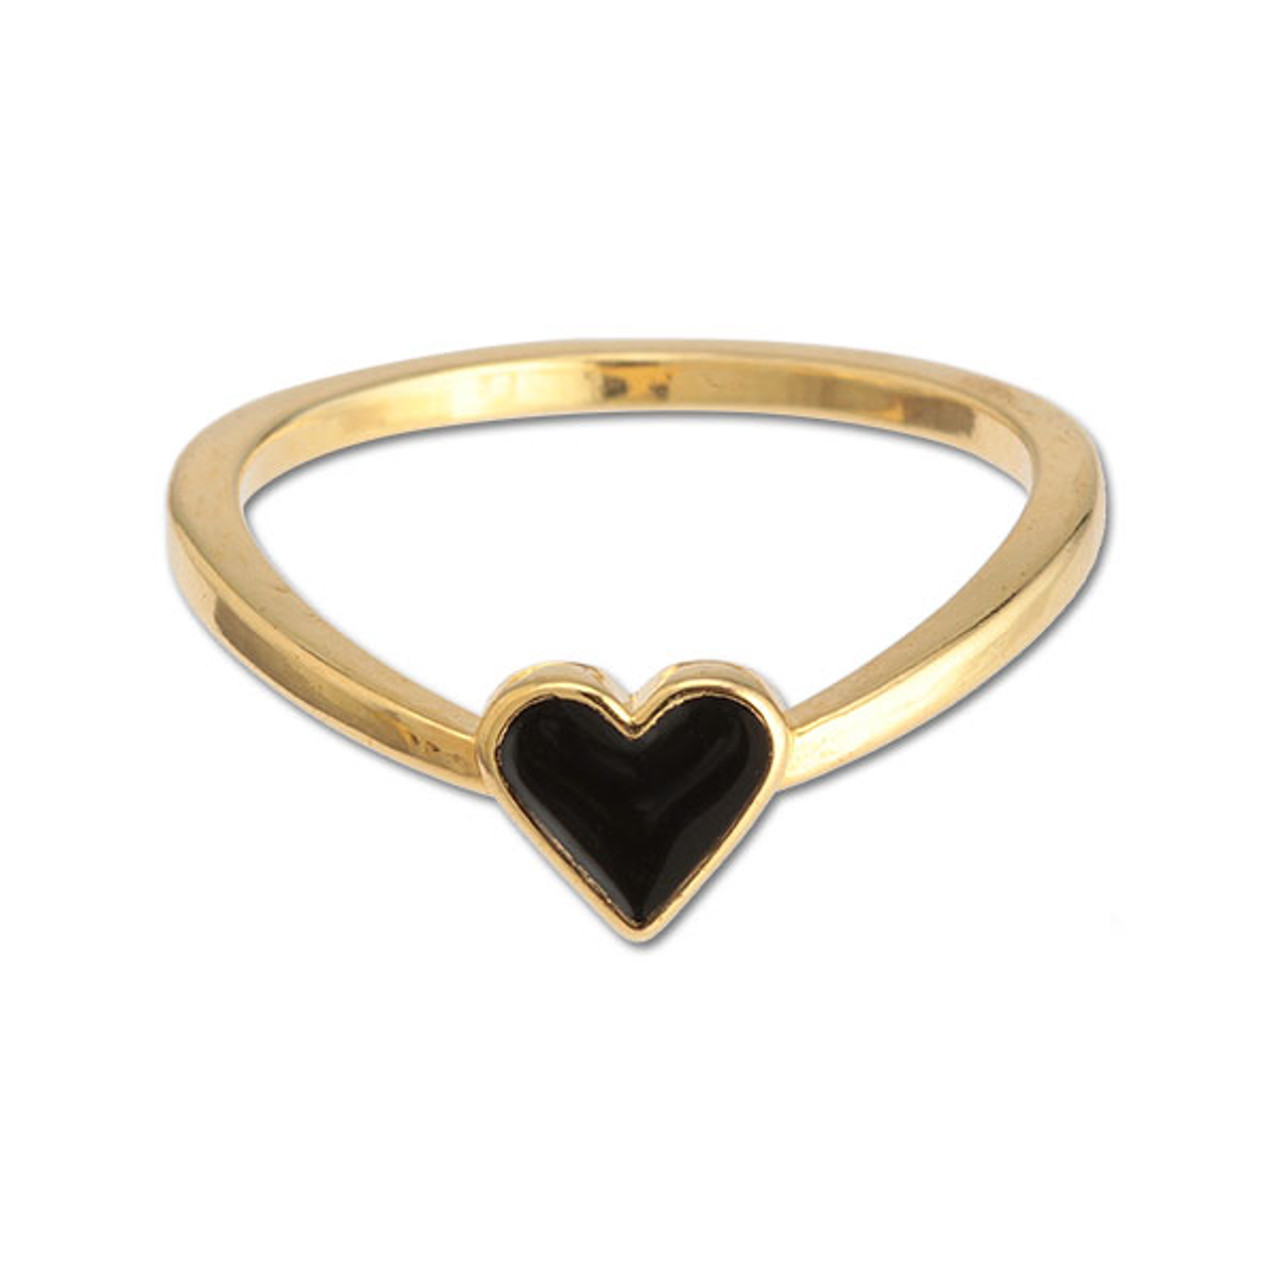 A delicate gold ring with a black resin heart shaped motif at the centre.